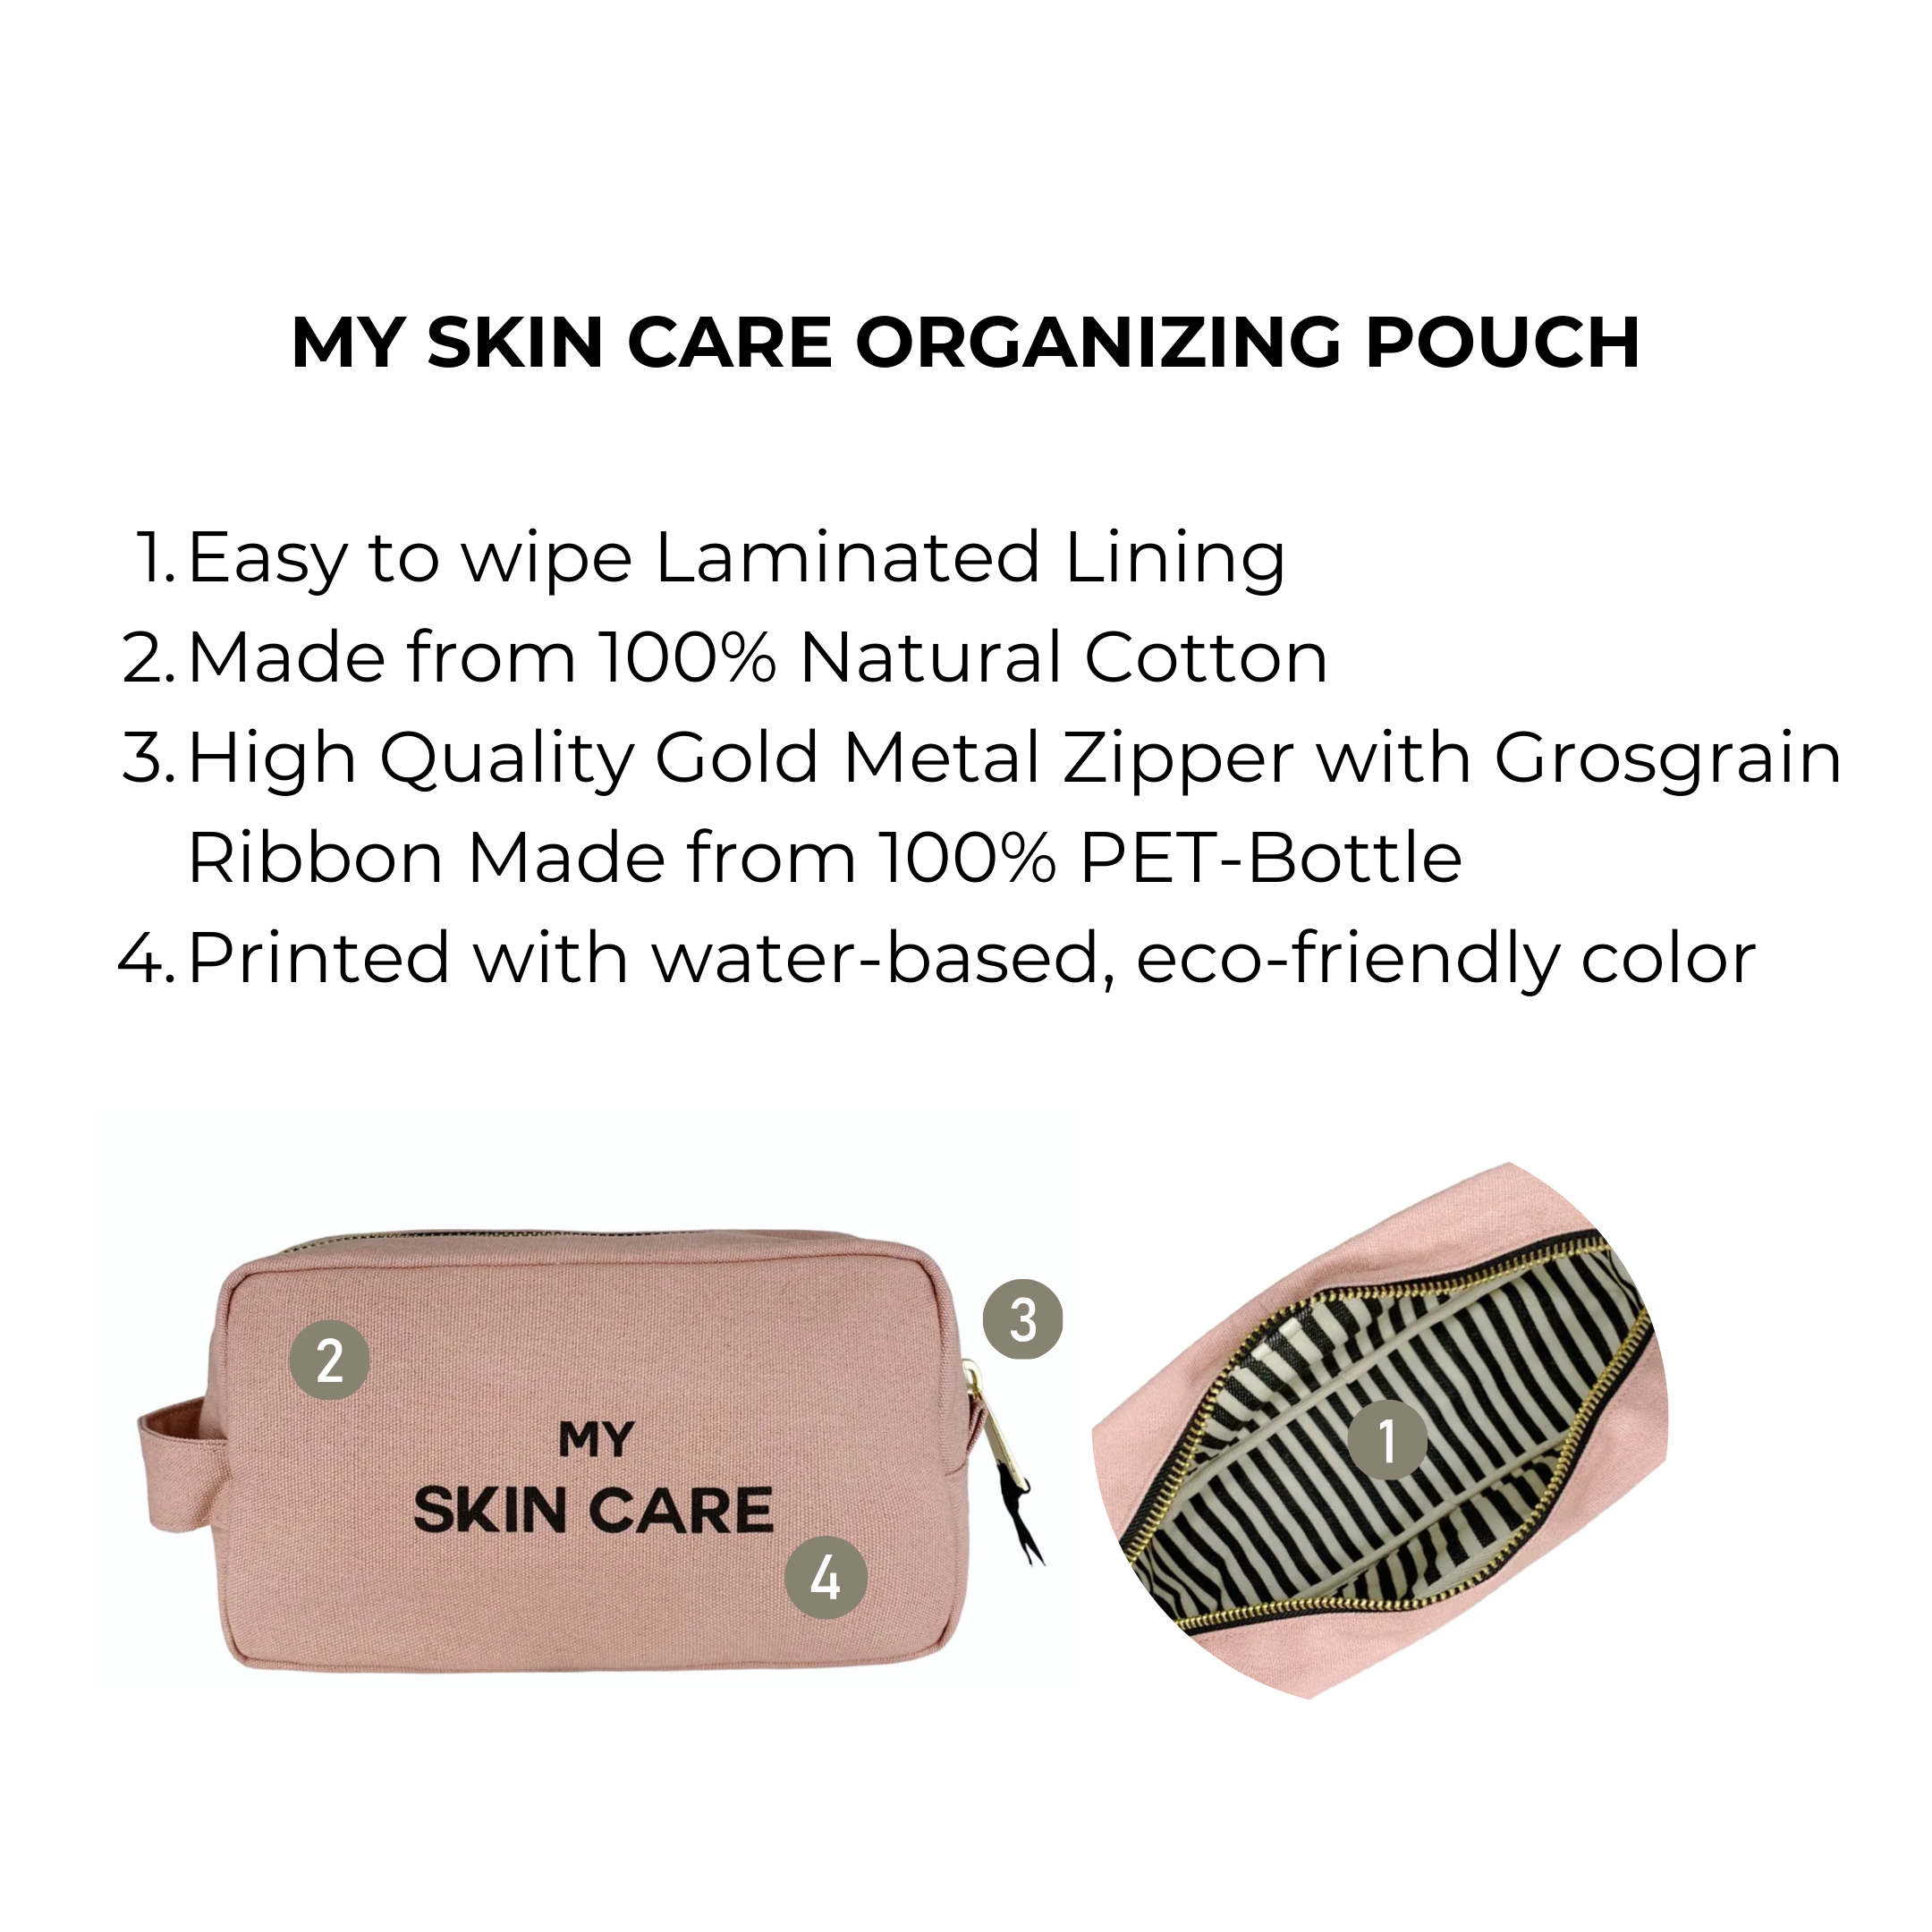 My Skin Care - Organizing Pouch, Pink/Blush | Bag-all